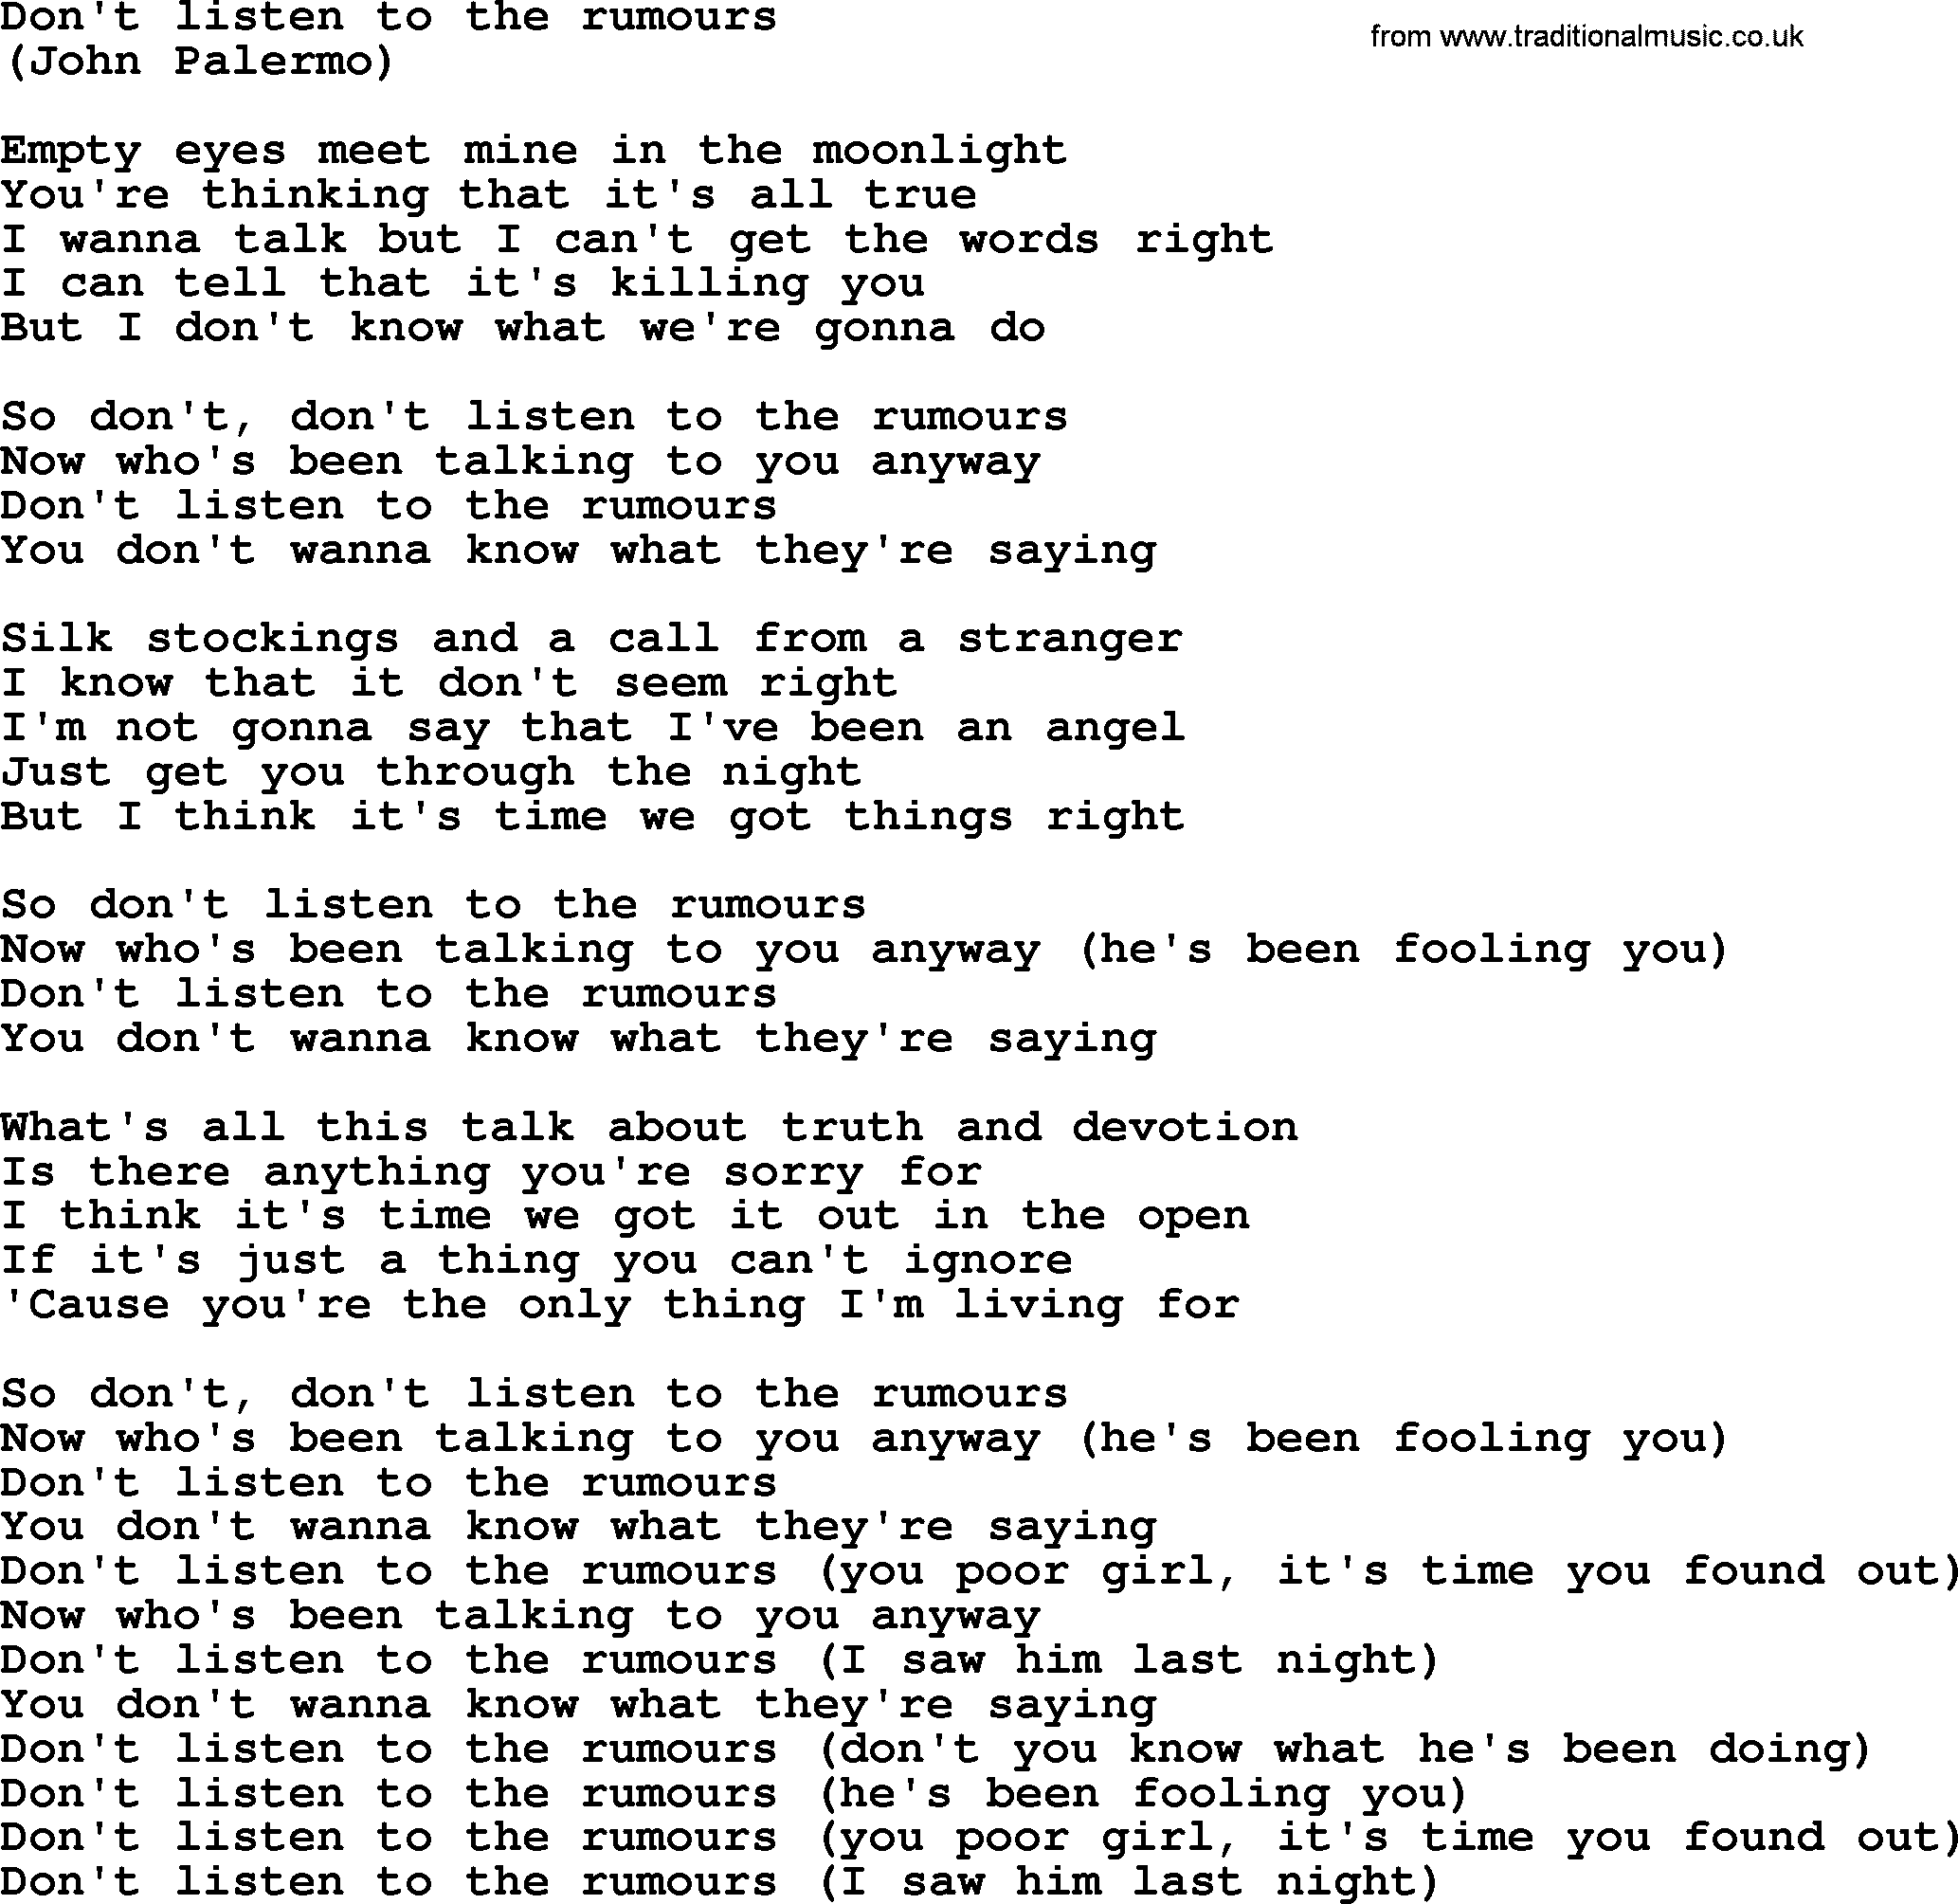 Don't Listen To The Rumours, by The Byrds - lyrics with pdf